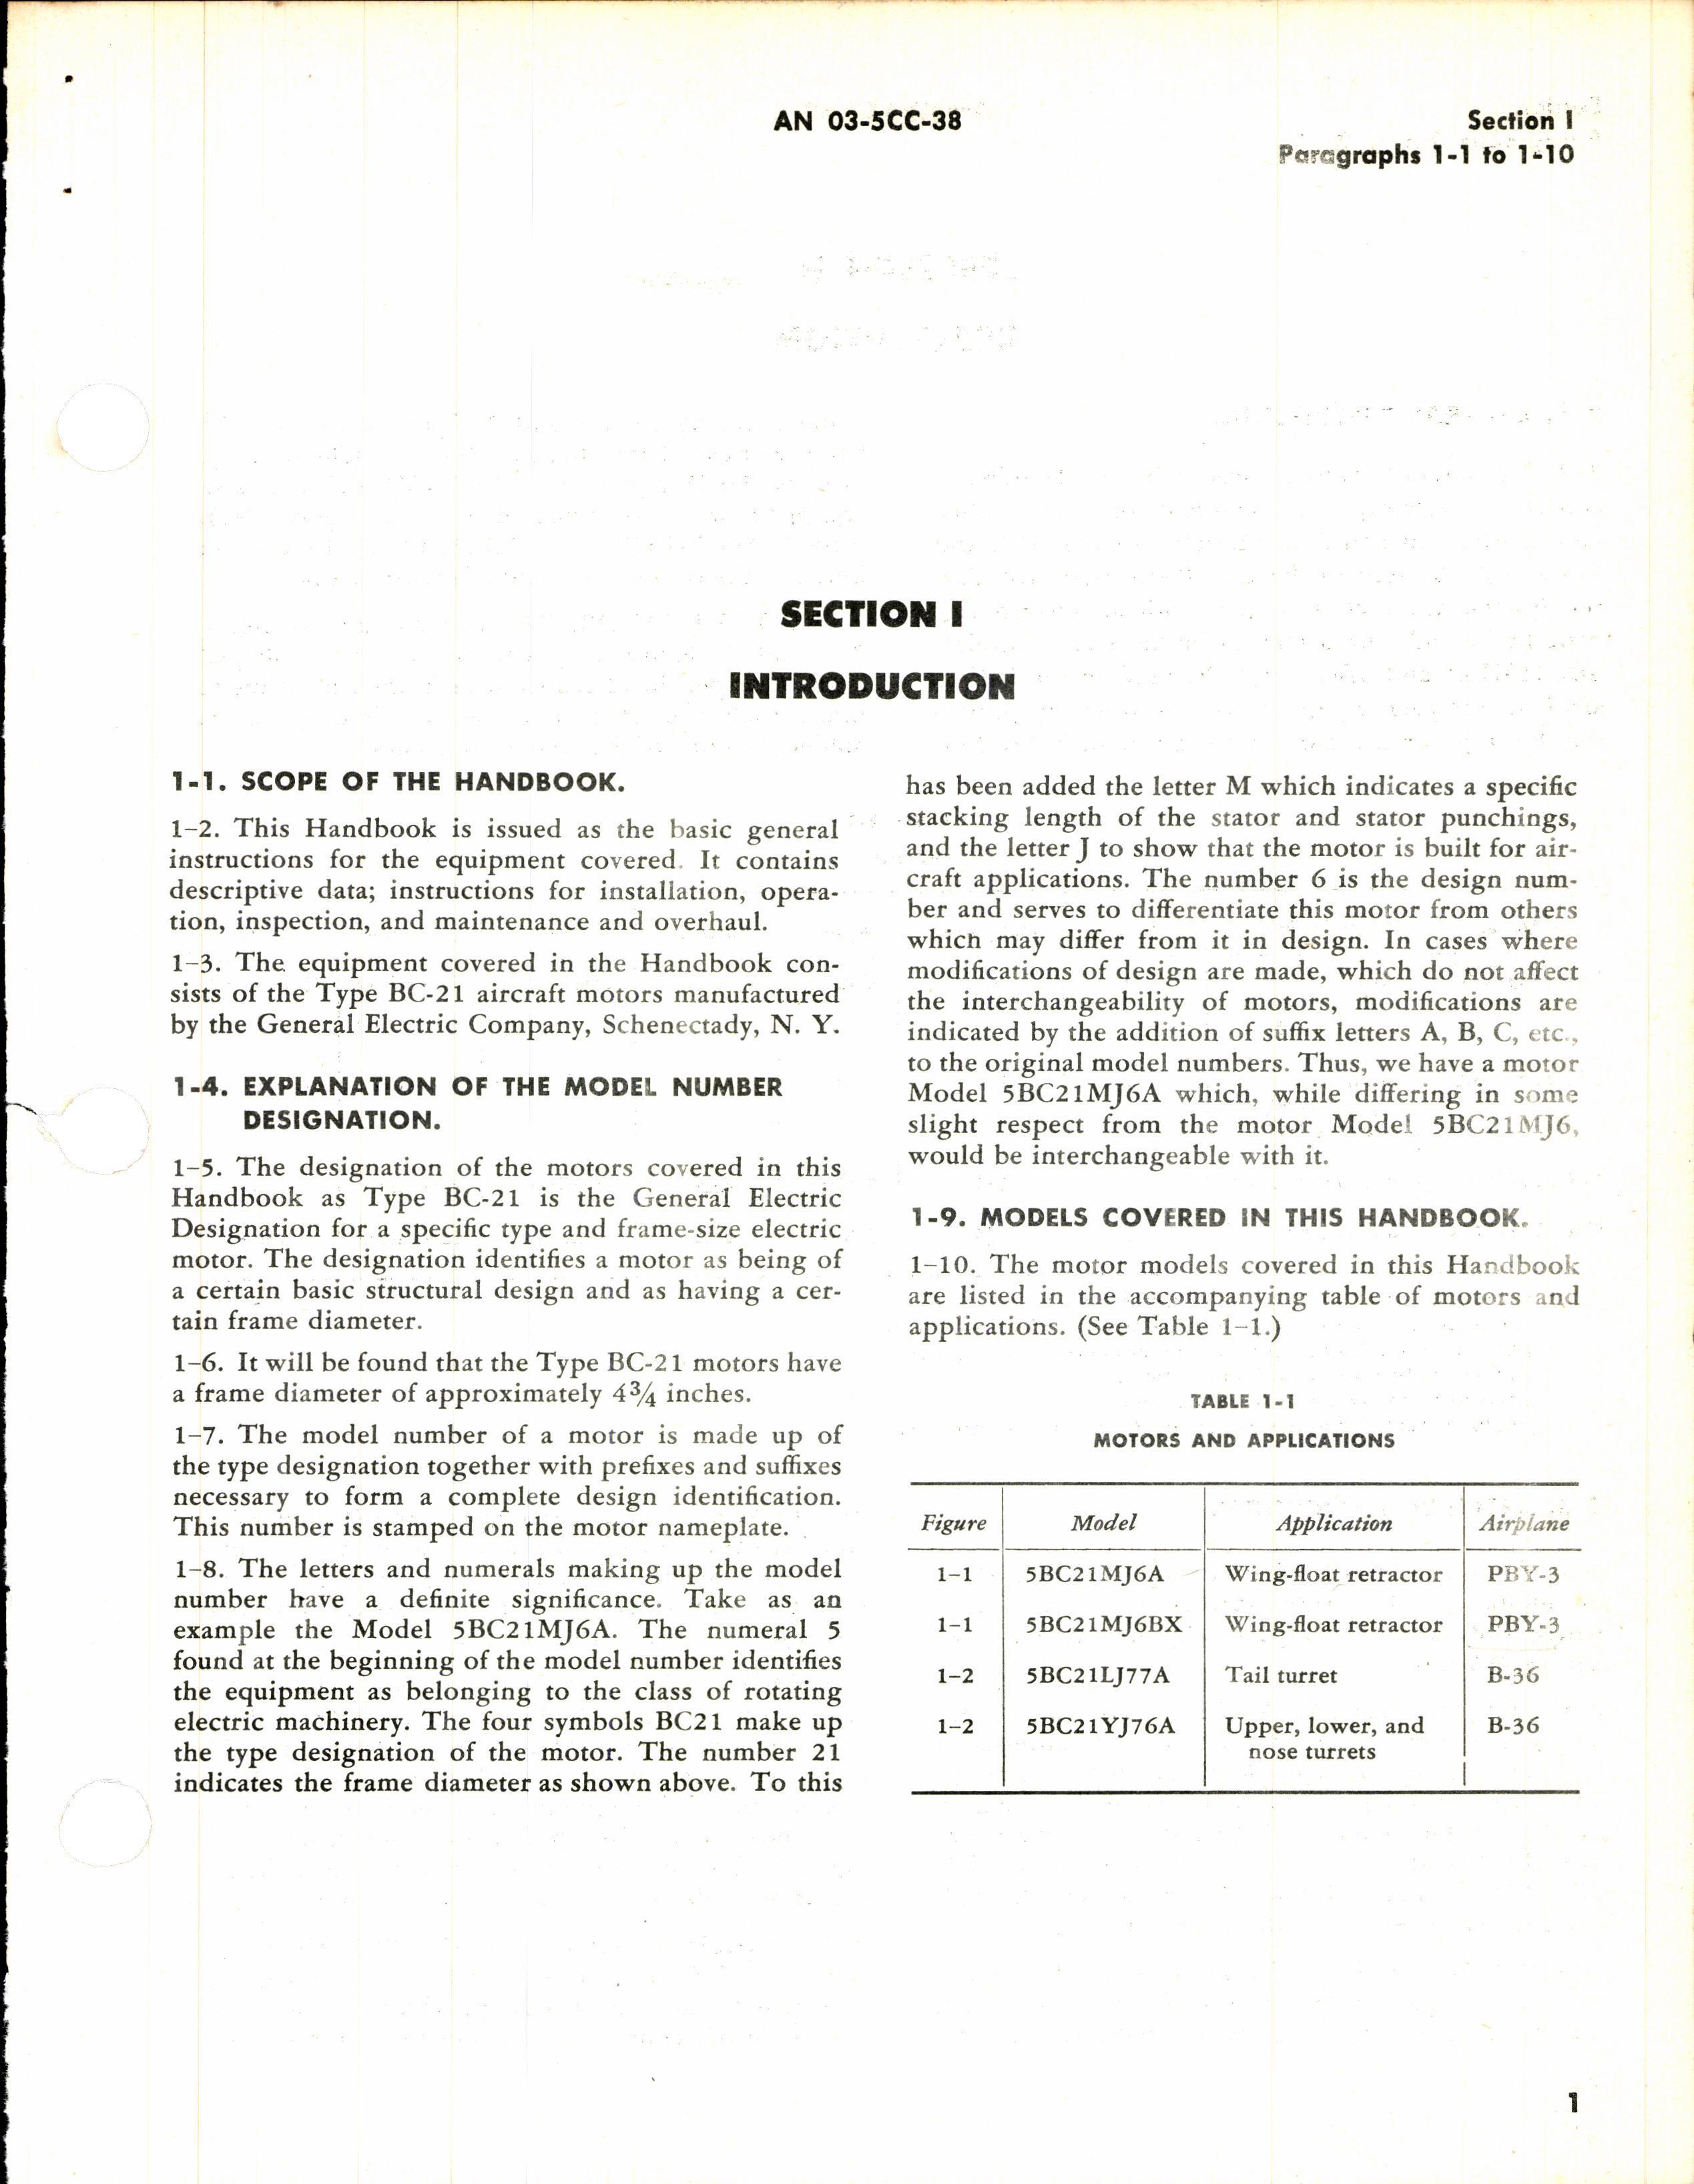 Sample page 5 from AirCorps Library document: Overhaul Instructions for General Electric Series 5BC21 Aircraft Motors